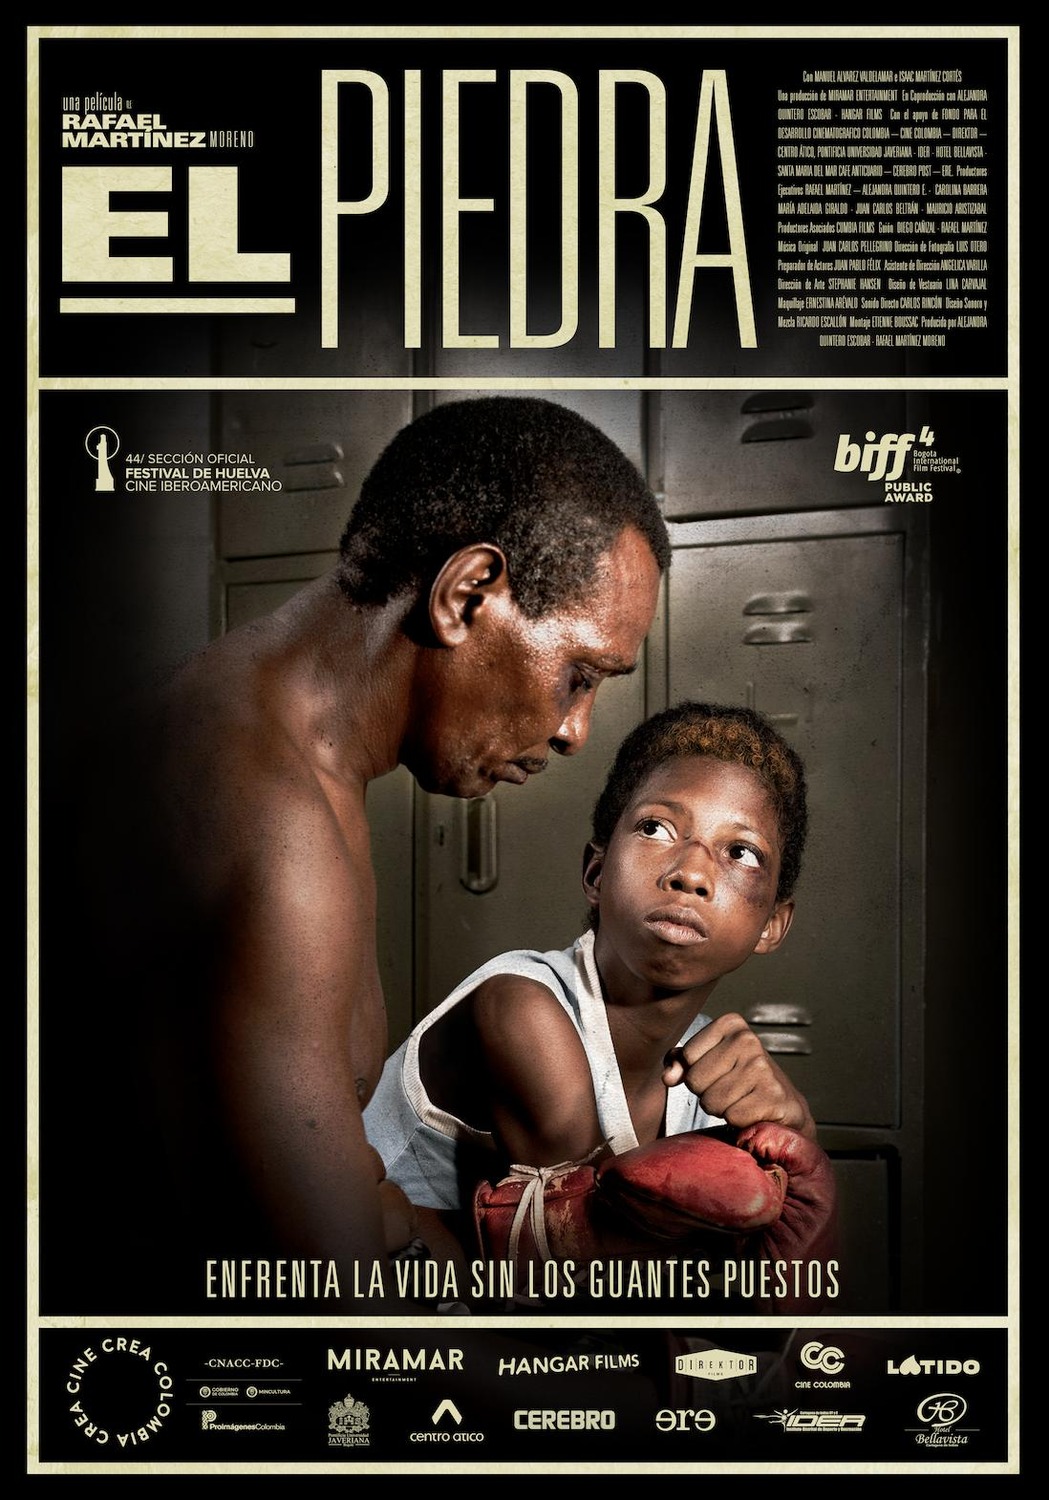 Extra Large Movie Poster Image for El Piedra 